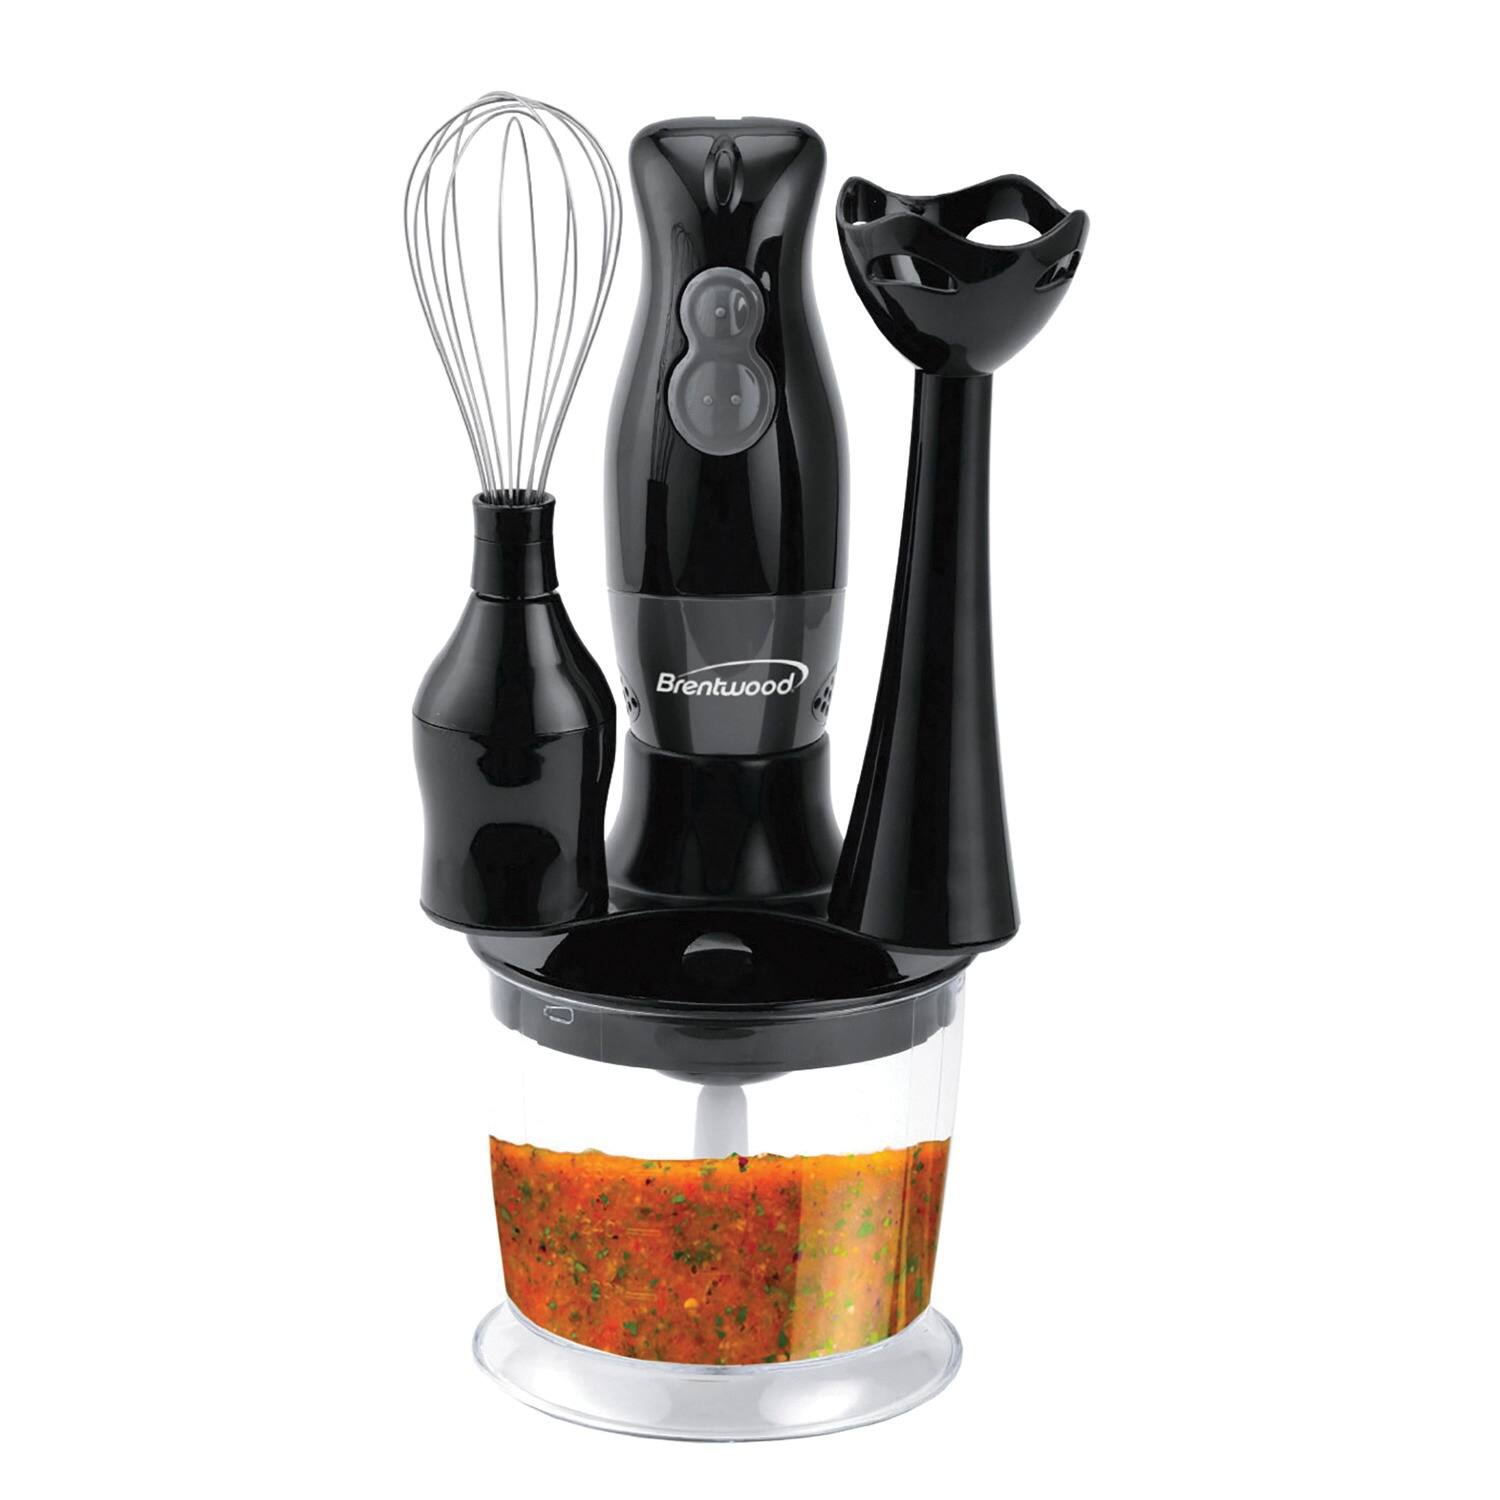 Brentwood Black 2-Speed Hand Blender & Food Processor with Balloon Whisk